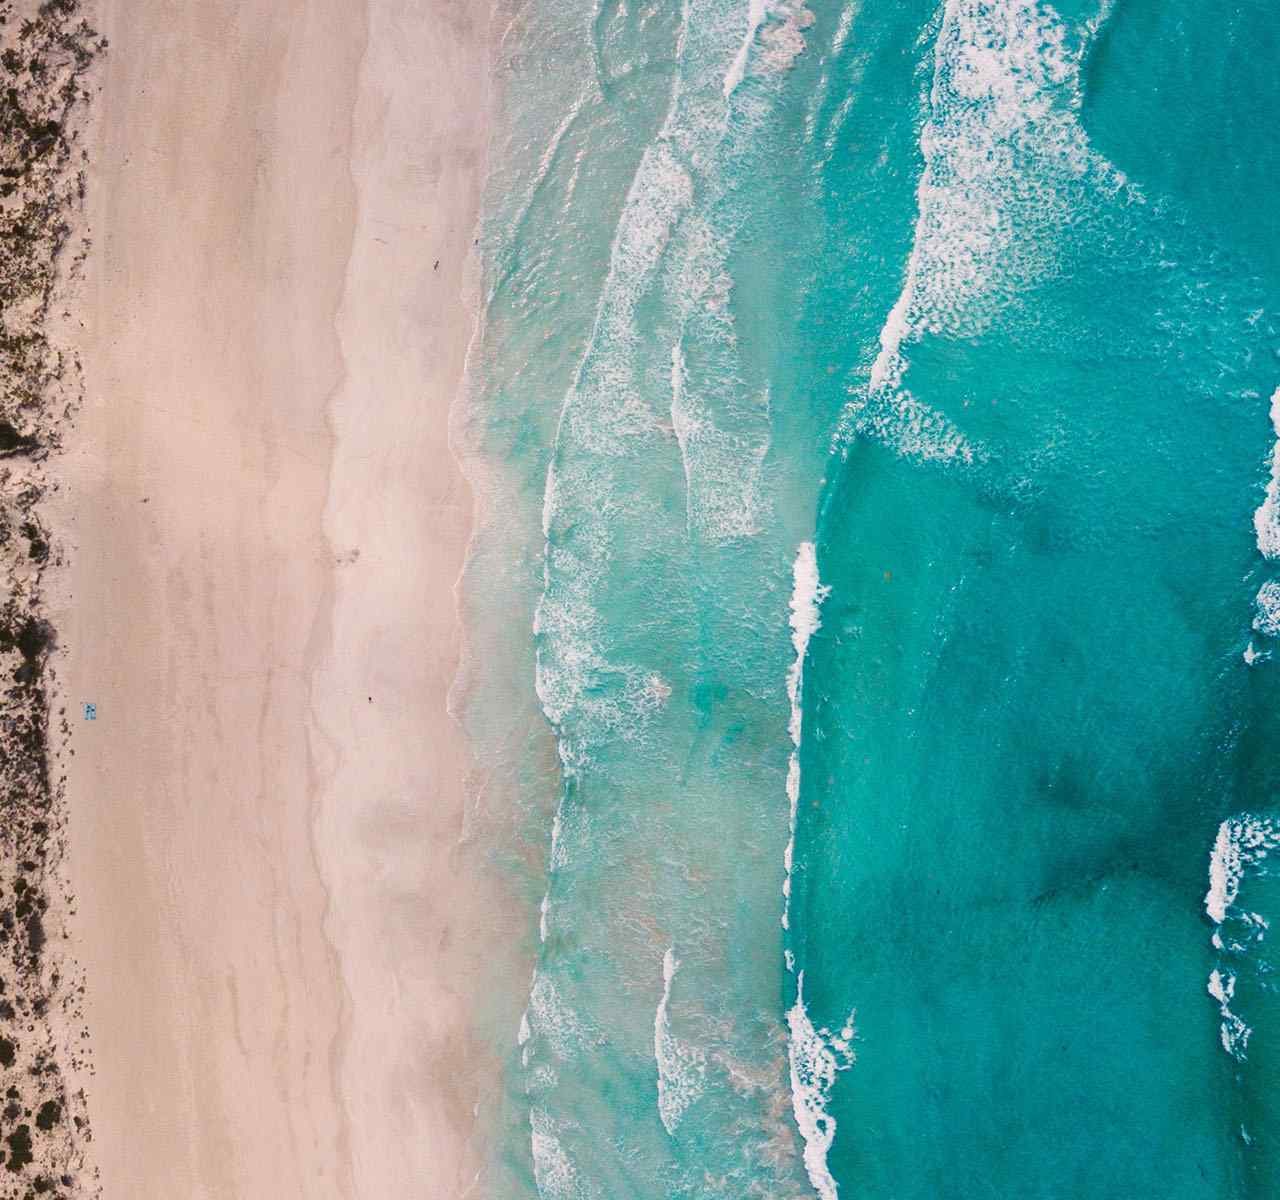 Beach view from drone